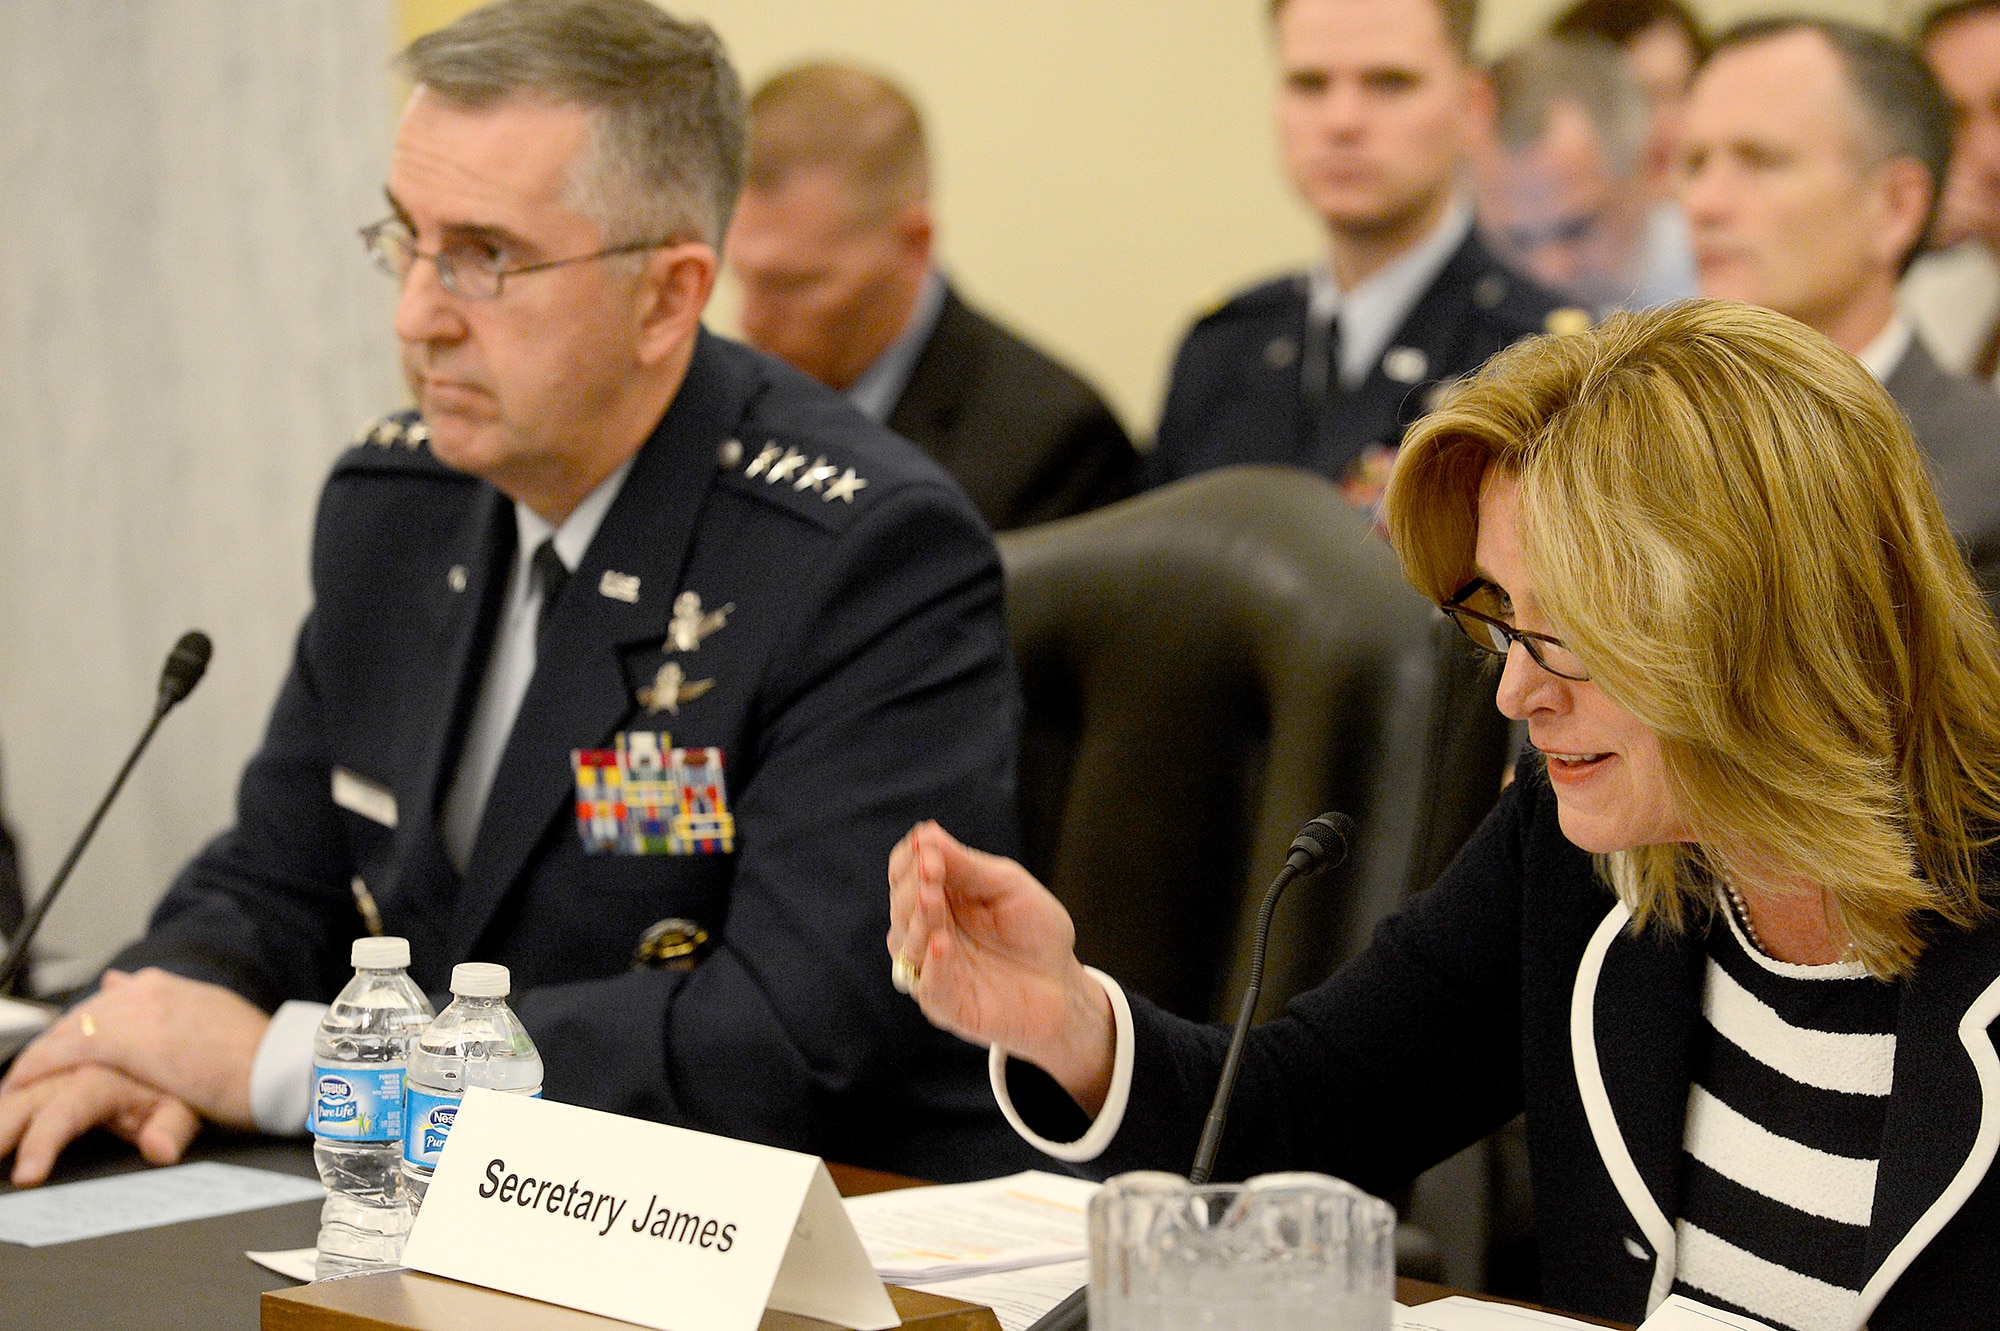 Secretary of the Air Force Deborah Lee James and Gen. John E. Hyten, commander of Air Force Space Command, testify before the Senate Armed Services Committee, Subcommittee on Strategic Forces in Washington, D.C., April 29, 2015. James stated during the hearing that space-based capabilities and effects are vital to U.S. warfighting, homeland security and the country’s way of life. James and Hyten also testified with Cristina T. Chaplain, director of Acquisition and Sourcing Management Government Accountability Office. (U.S. Air Force photo/Scott M. Ash)
